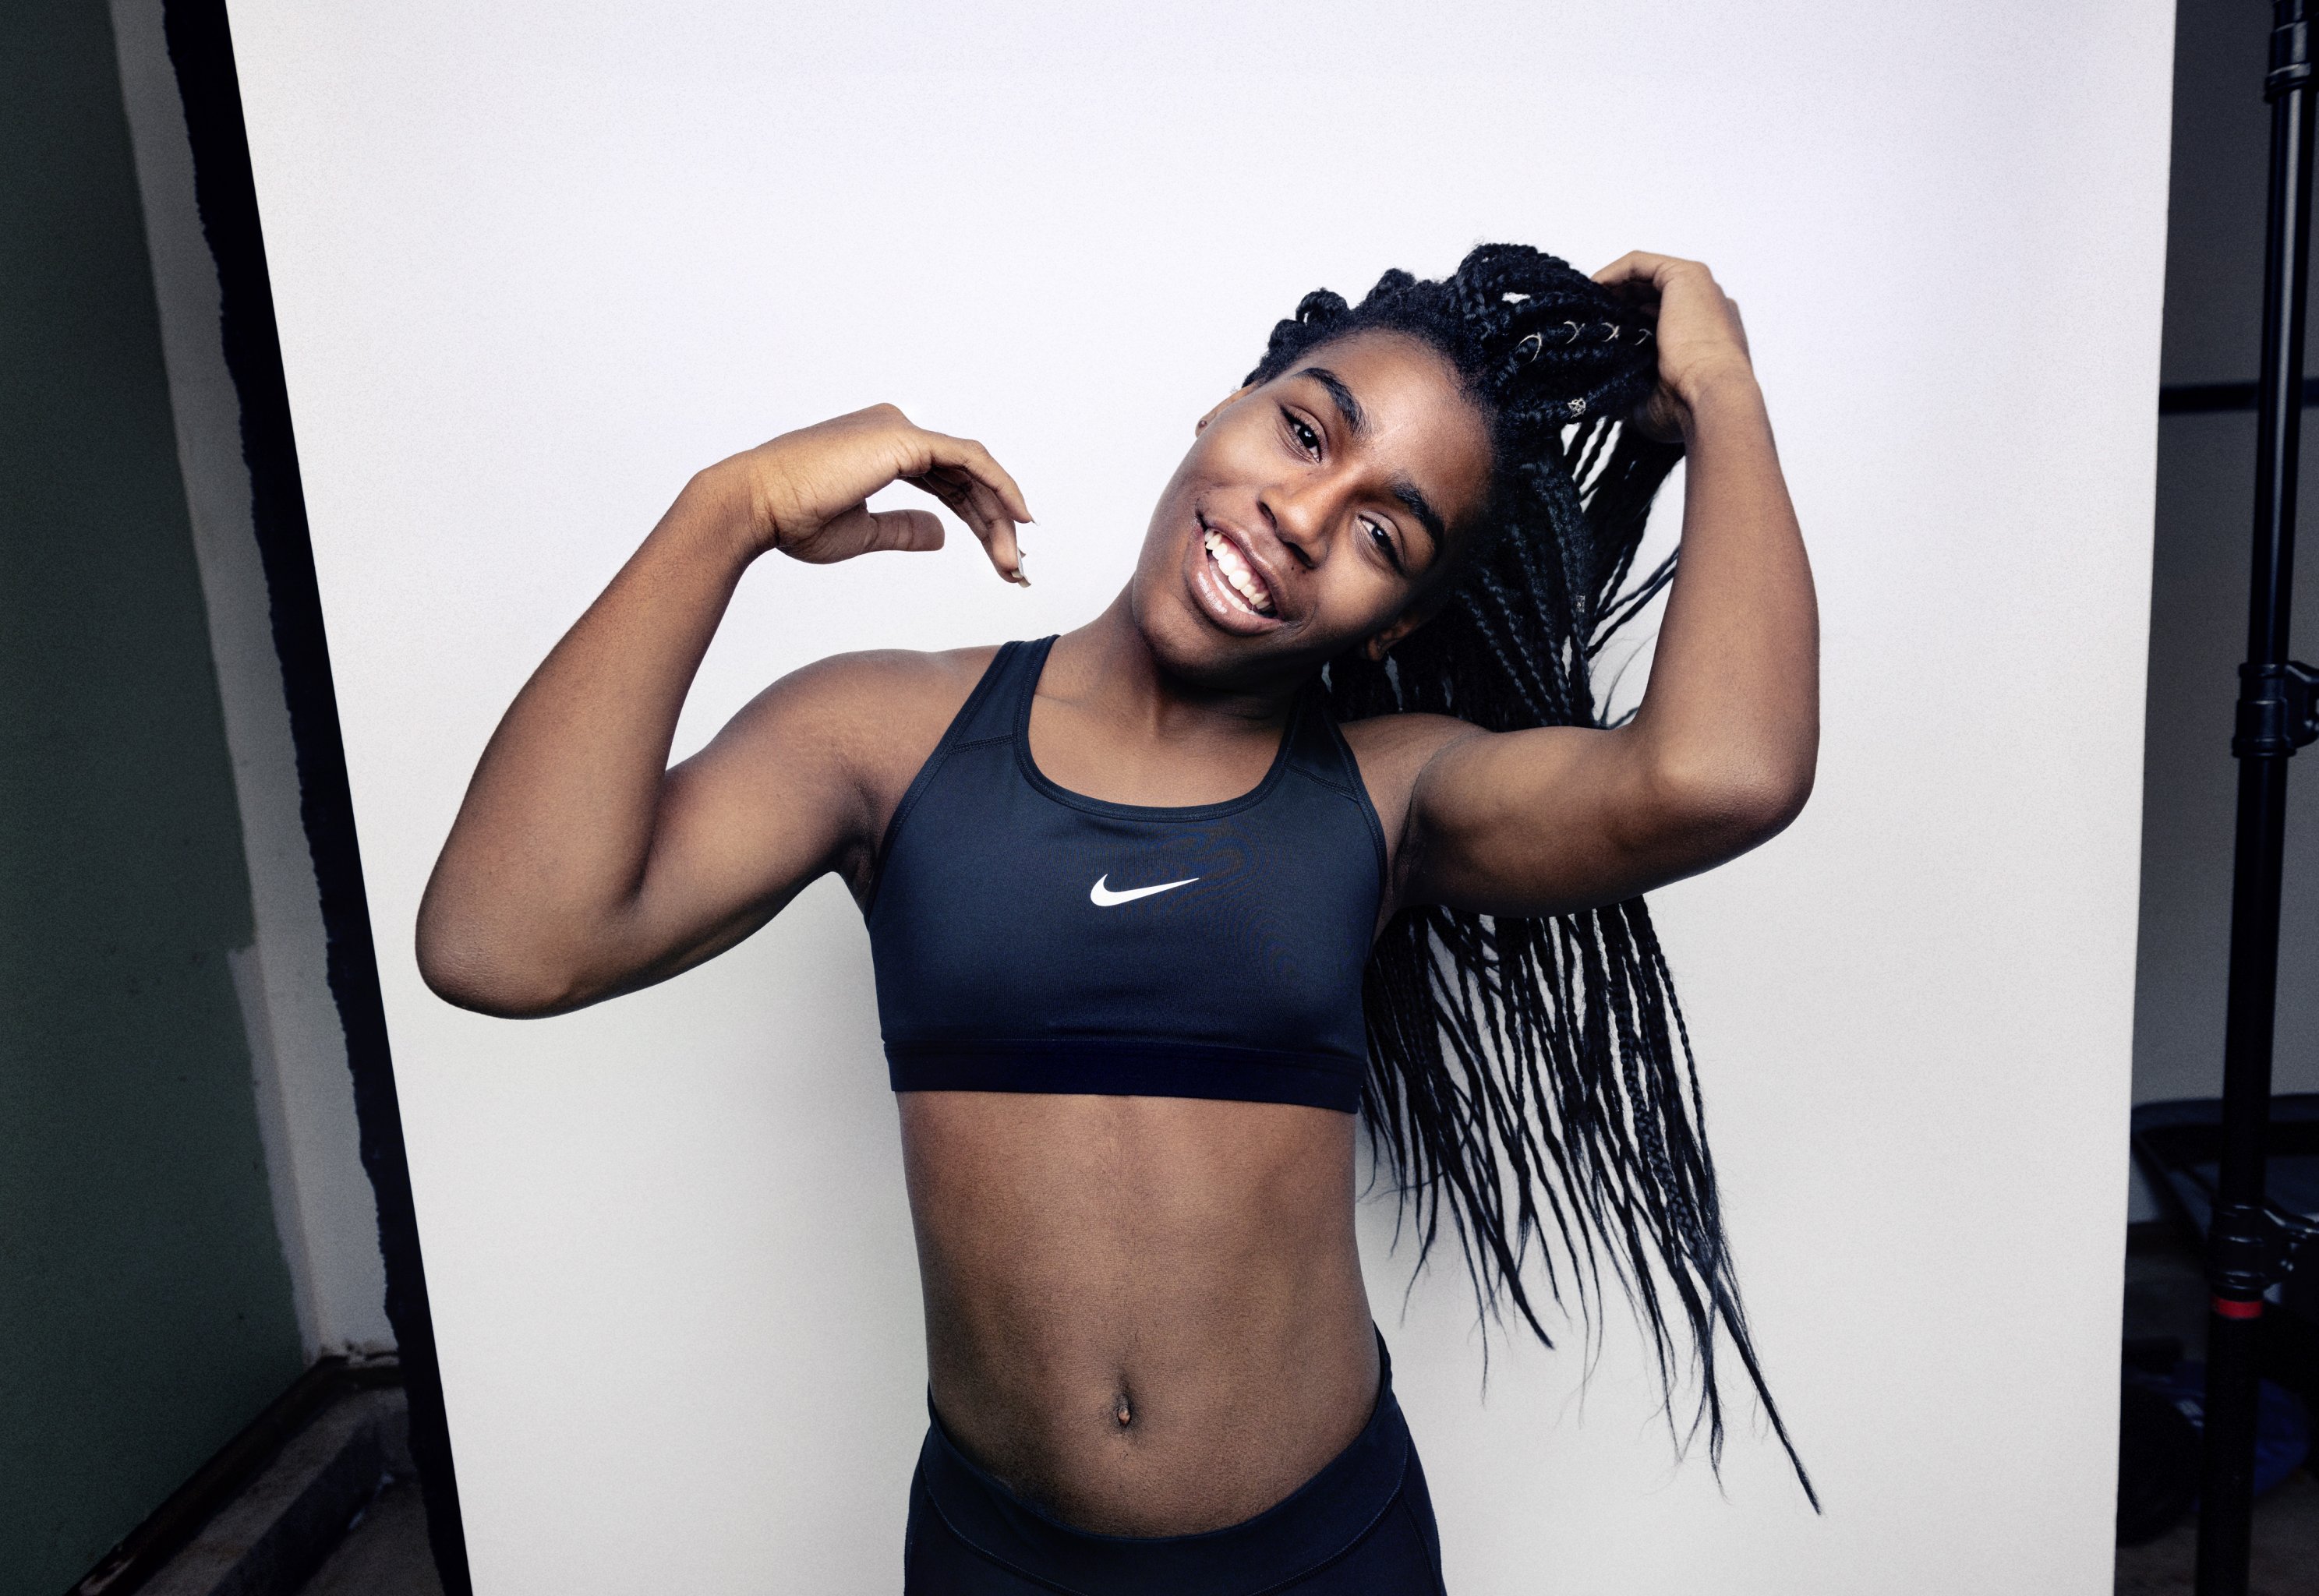 Andraya Yearwood Knows She Has the Right to Compete | Bleacher Report |  Latest News, Videos and Highlights